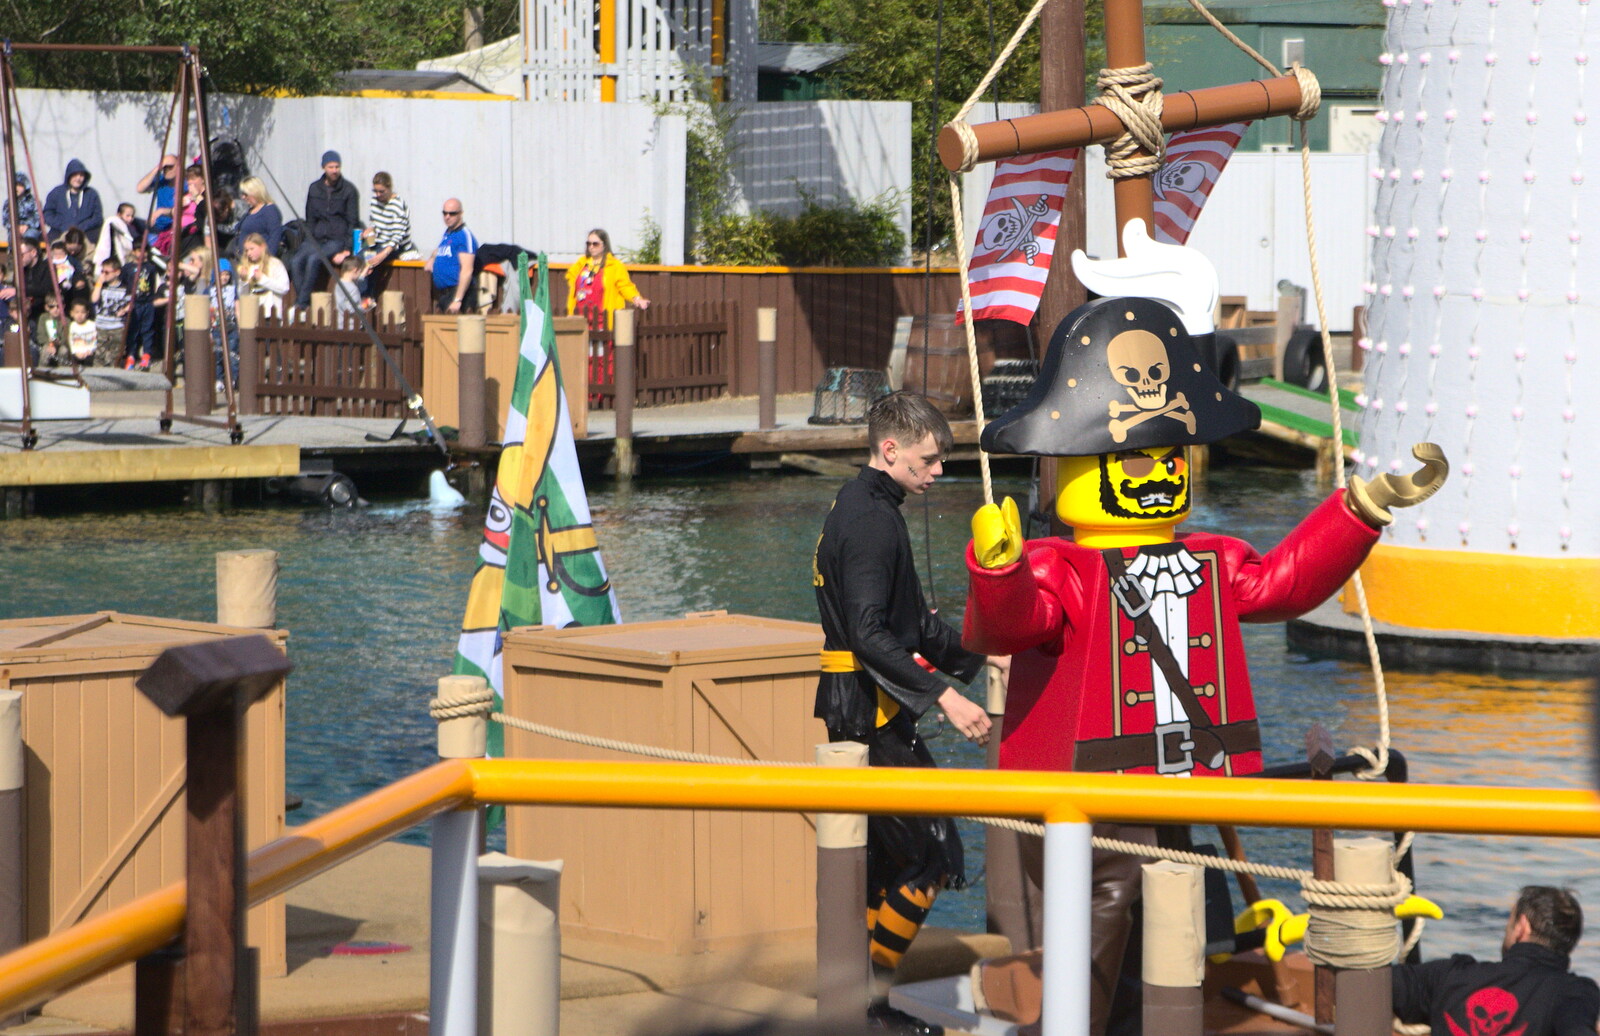 There's some sort of Pirate enactment going on from A Trip to Legoland, Windsor, Berkshire - 25th March 2017